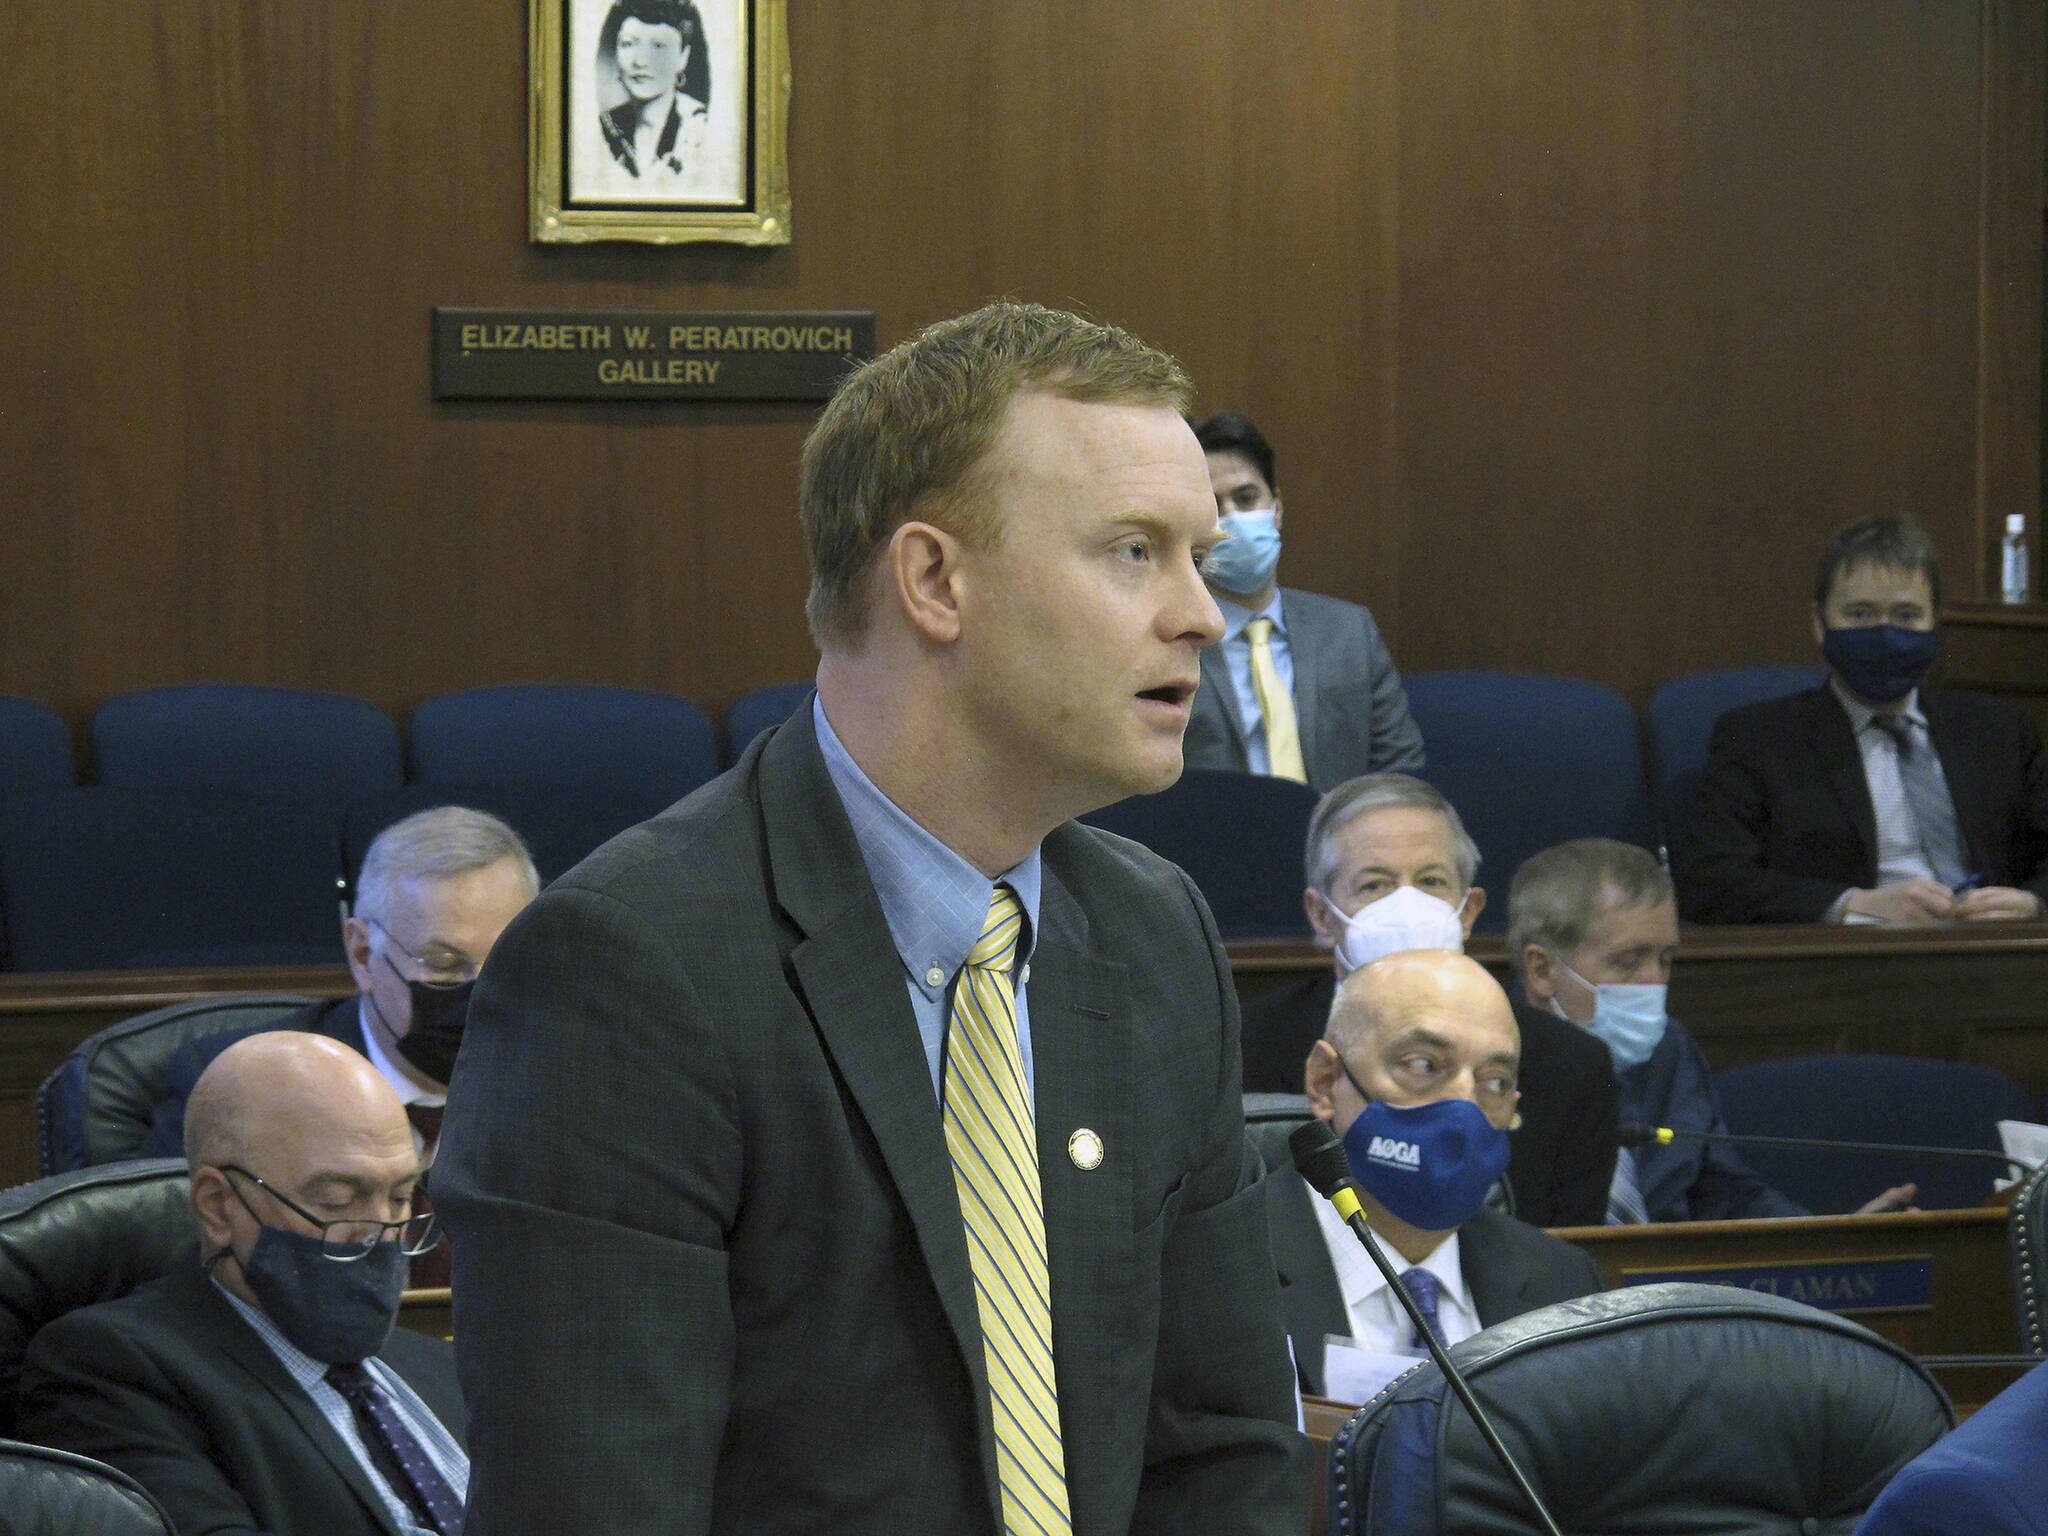 Alaska Republican state Rep. David Eastman speaks on the floor of the Alaska House on Jan. 31, 2022, in Juneau, Alaska. Alaska House Republicans have removed Rep. David Eastman from their caucus, Minority Leader Cathy Tilton said Friday, April 29, 2022, citing tensions with the Wasilla Republican that have built over time. (AP File Photo/Becky Bohrer)